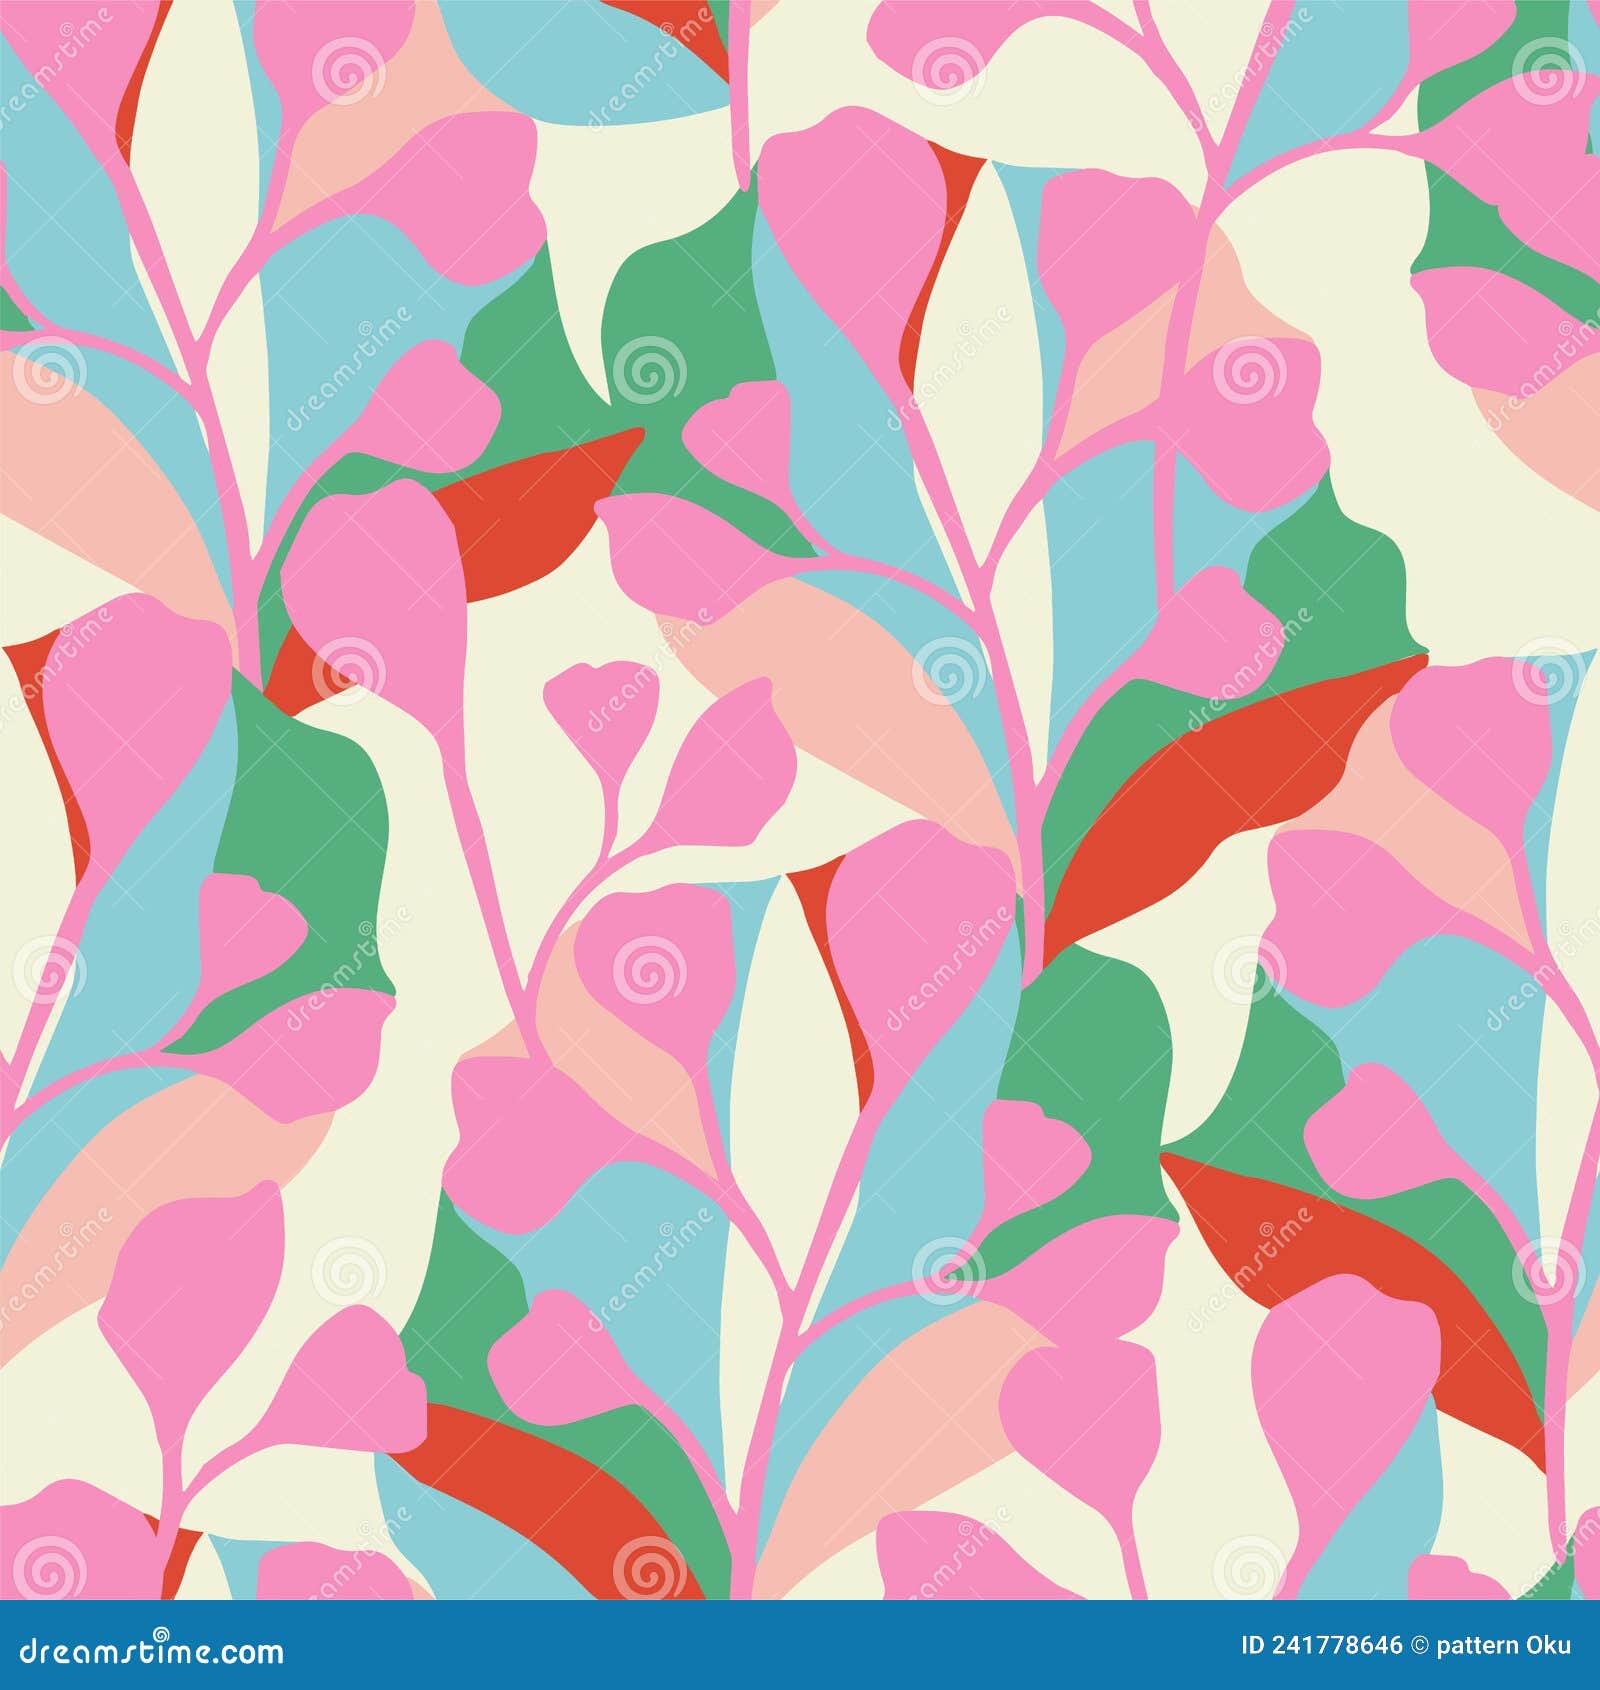  abstract leaf with color-blocking background  seamless repeat pattern